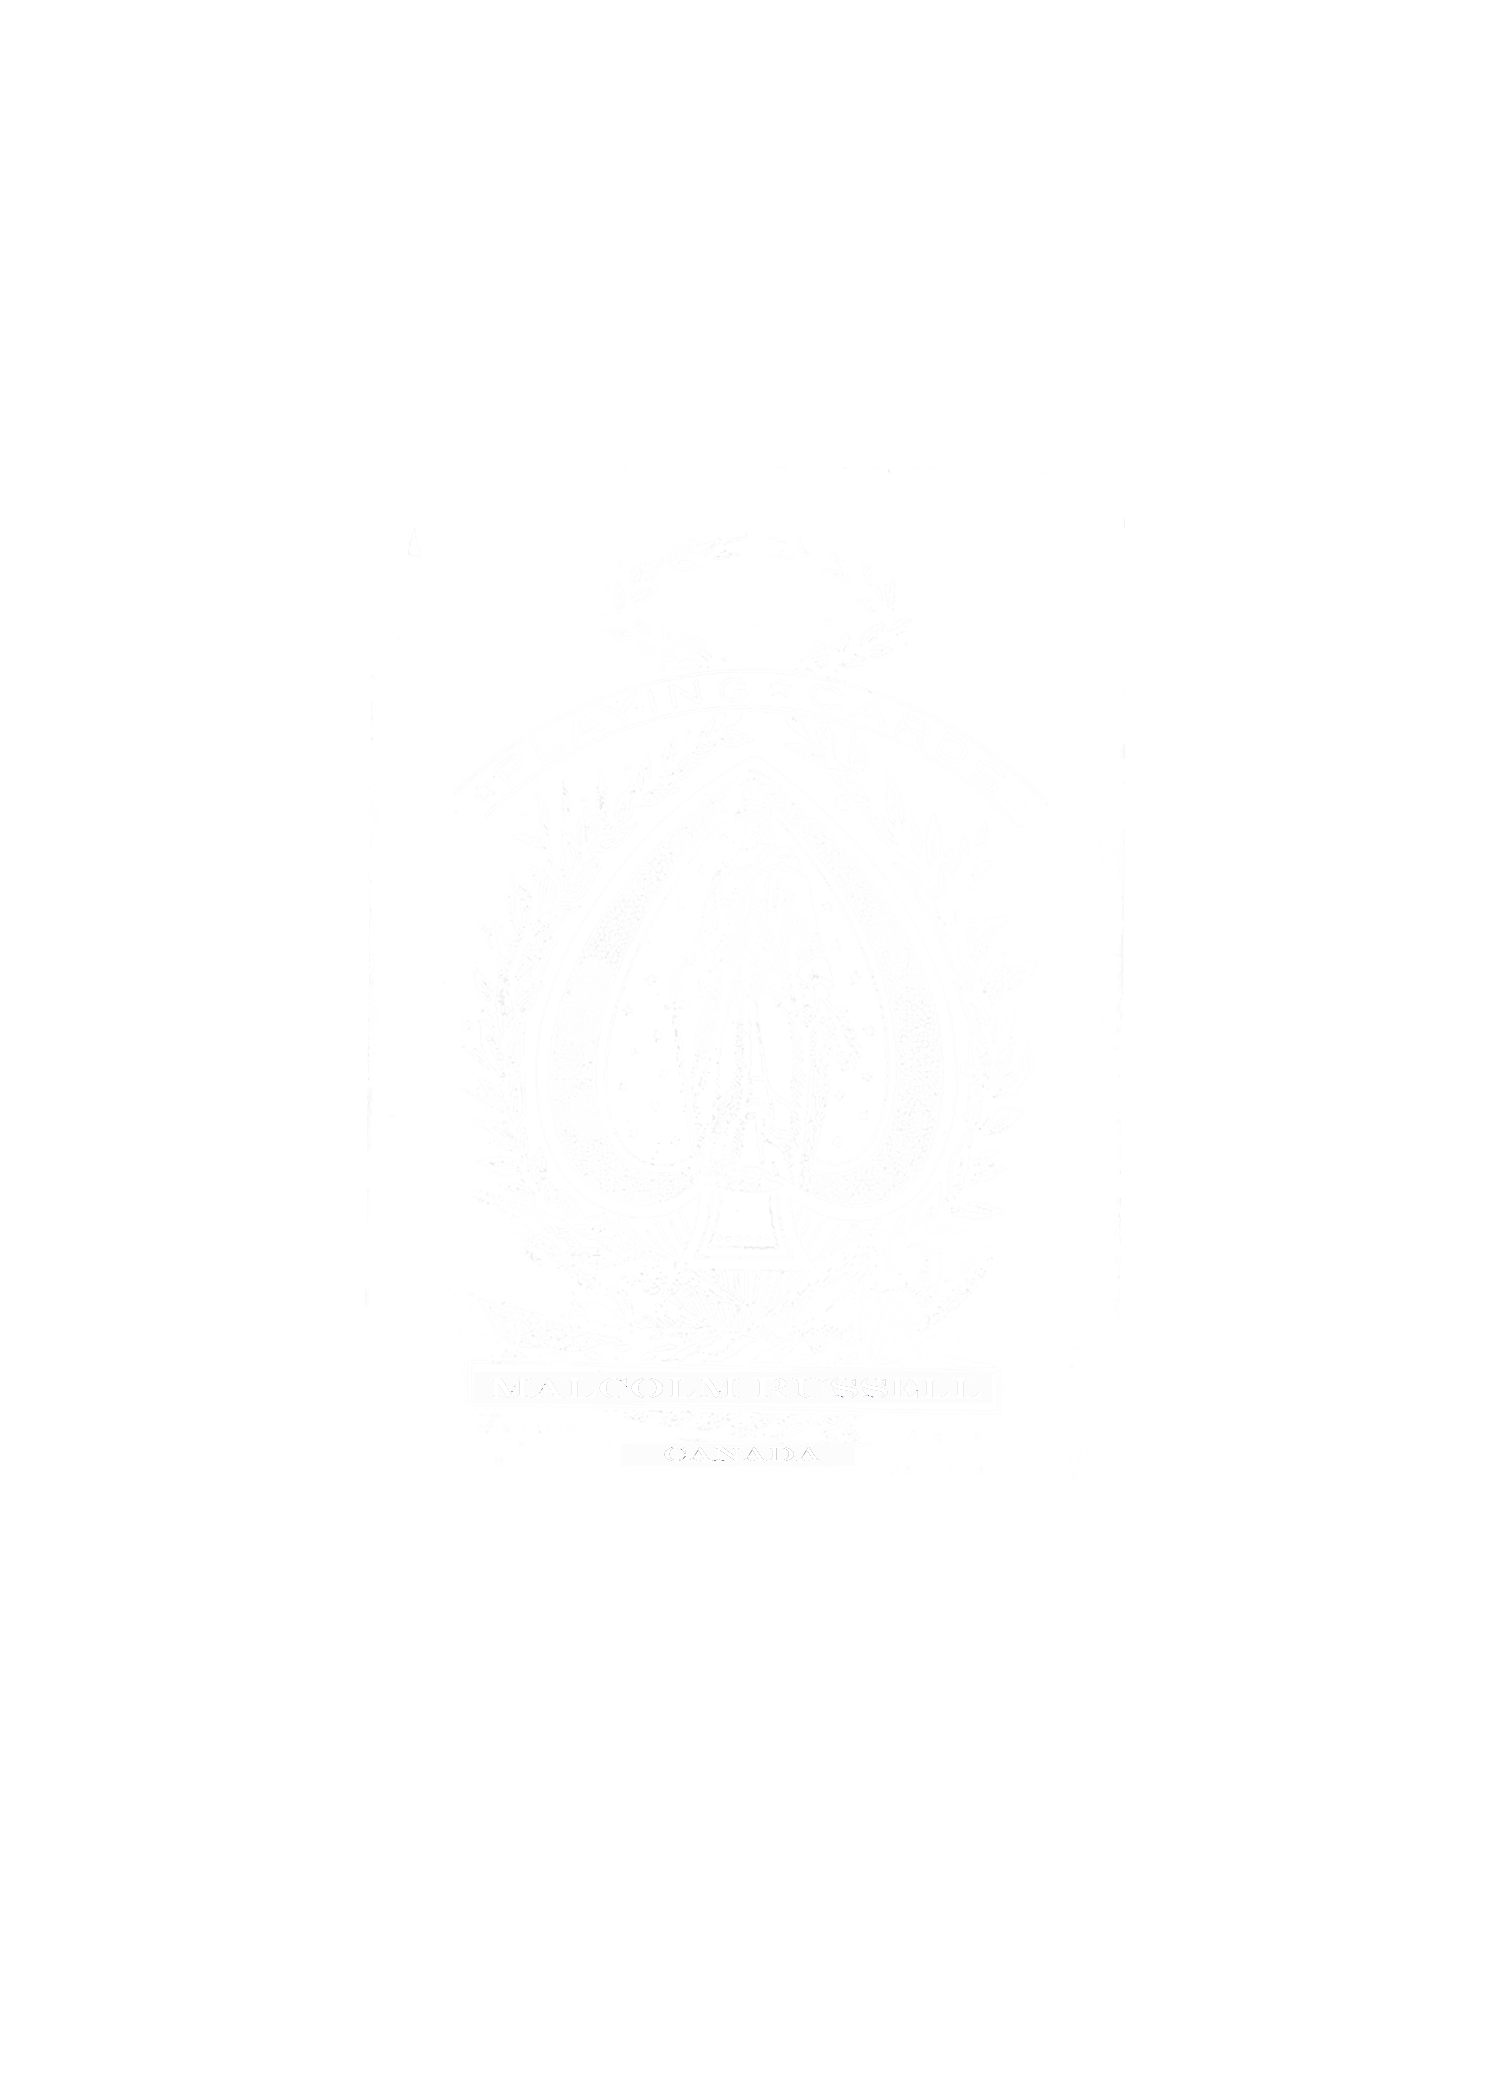 Malcolm Russell magician playing card logo